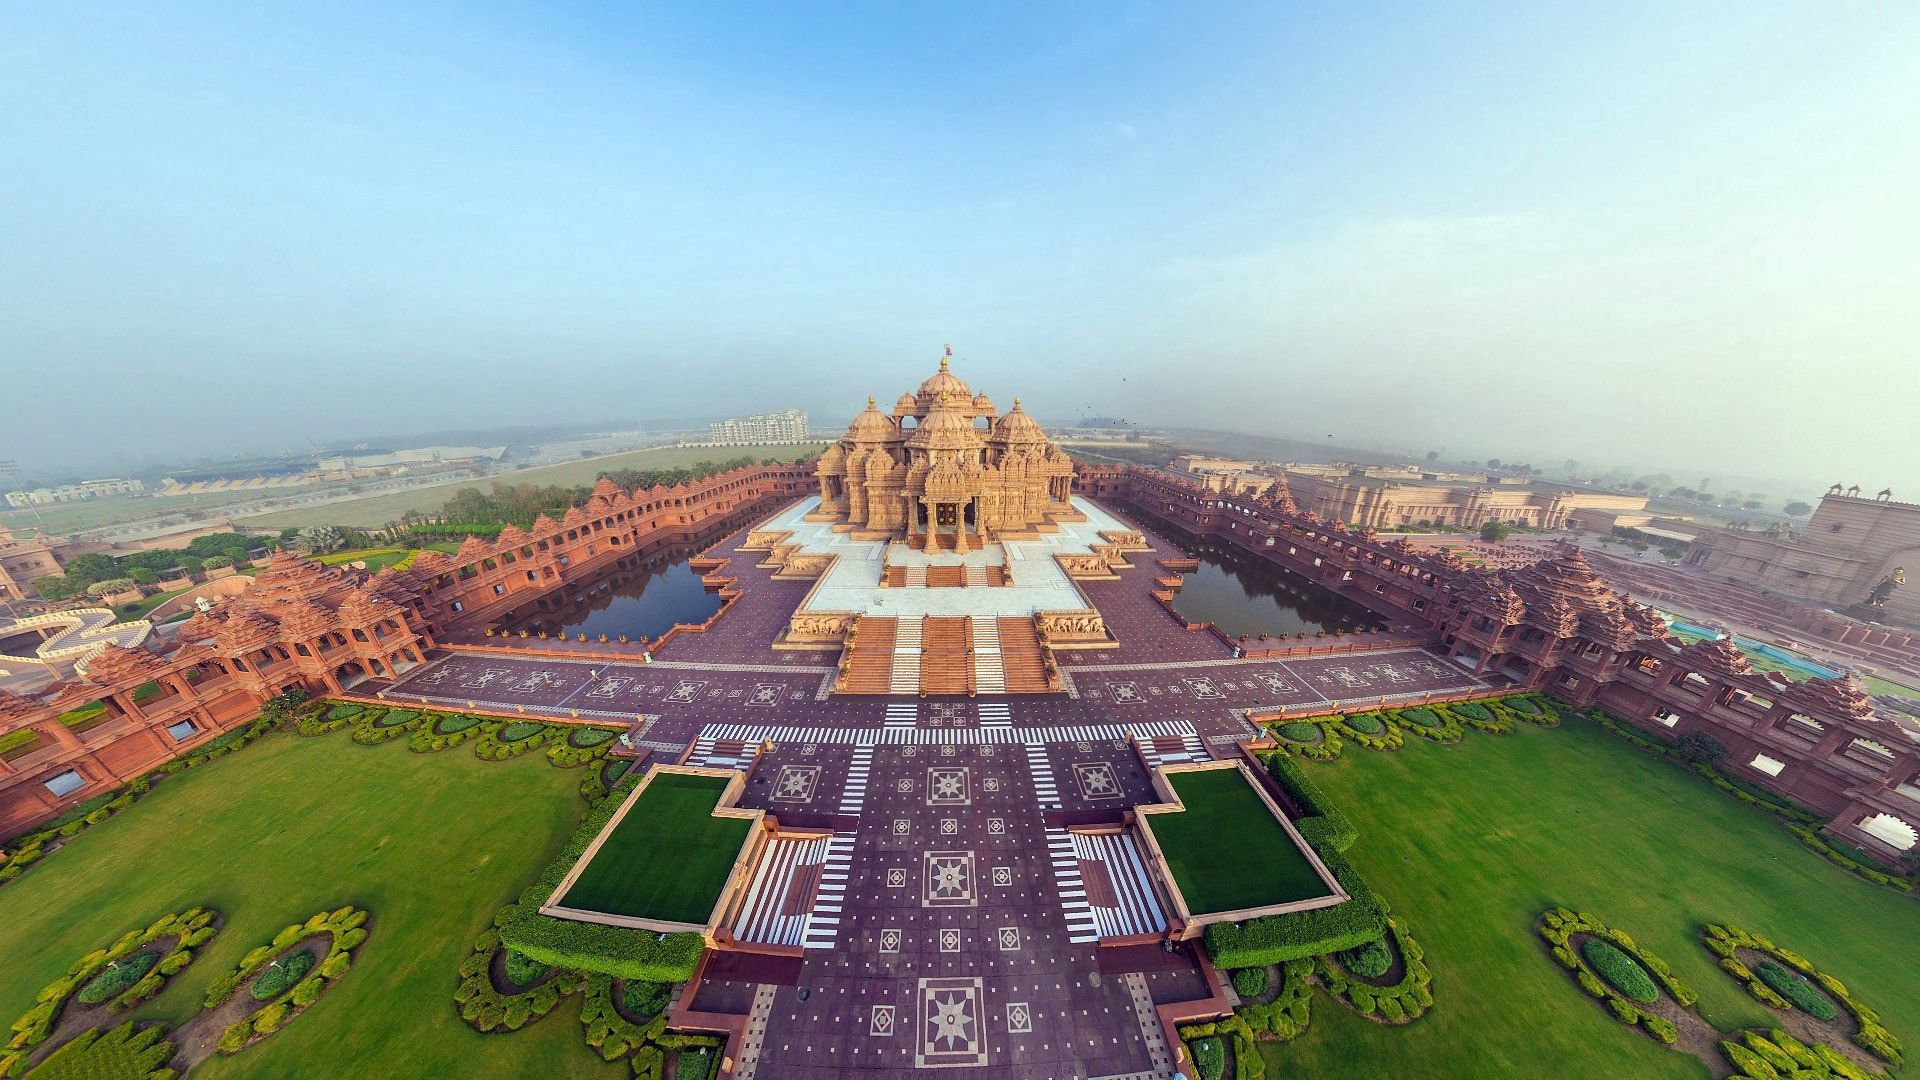 india, handsomely, akshardham temple, panorama, cities, view from above, it's beautiful